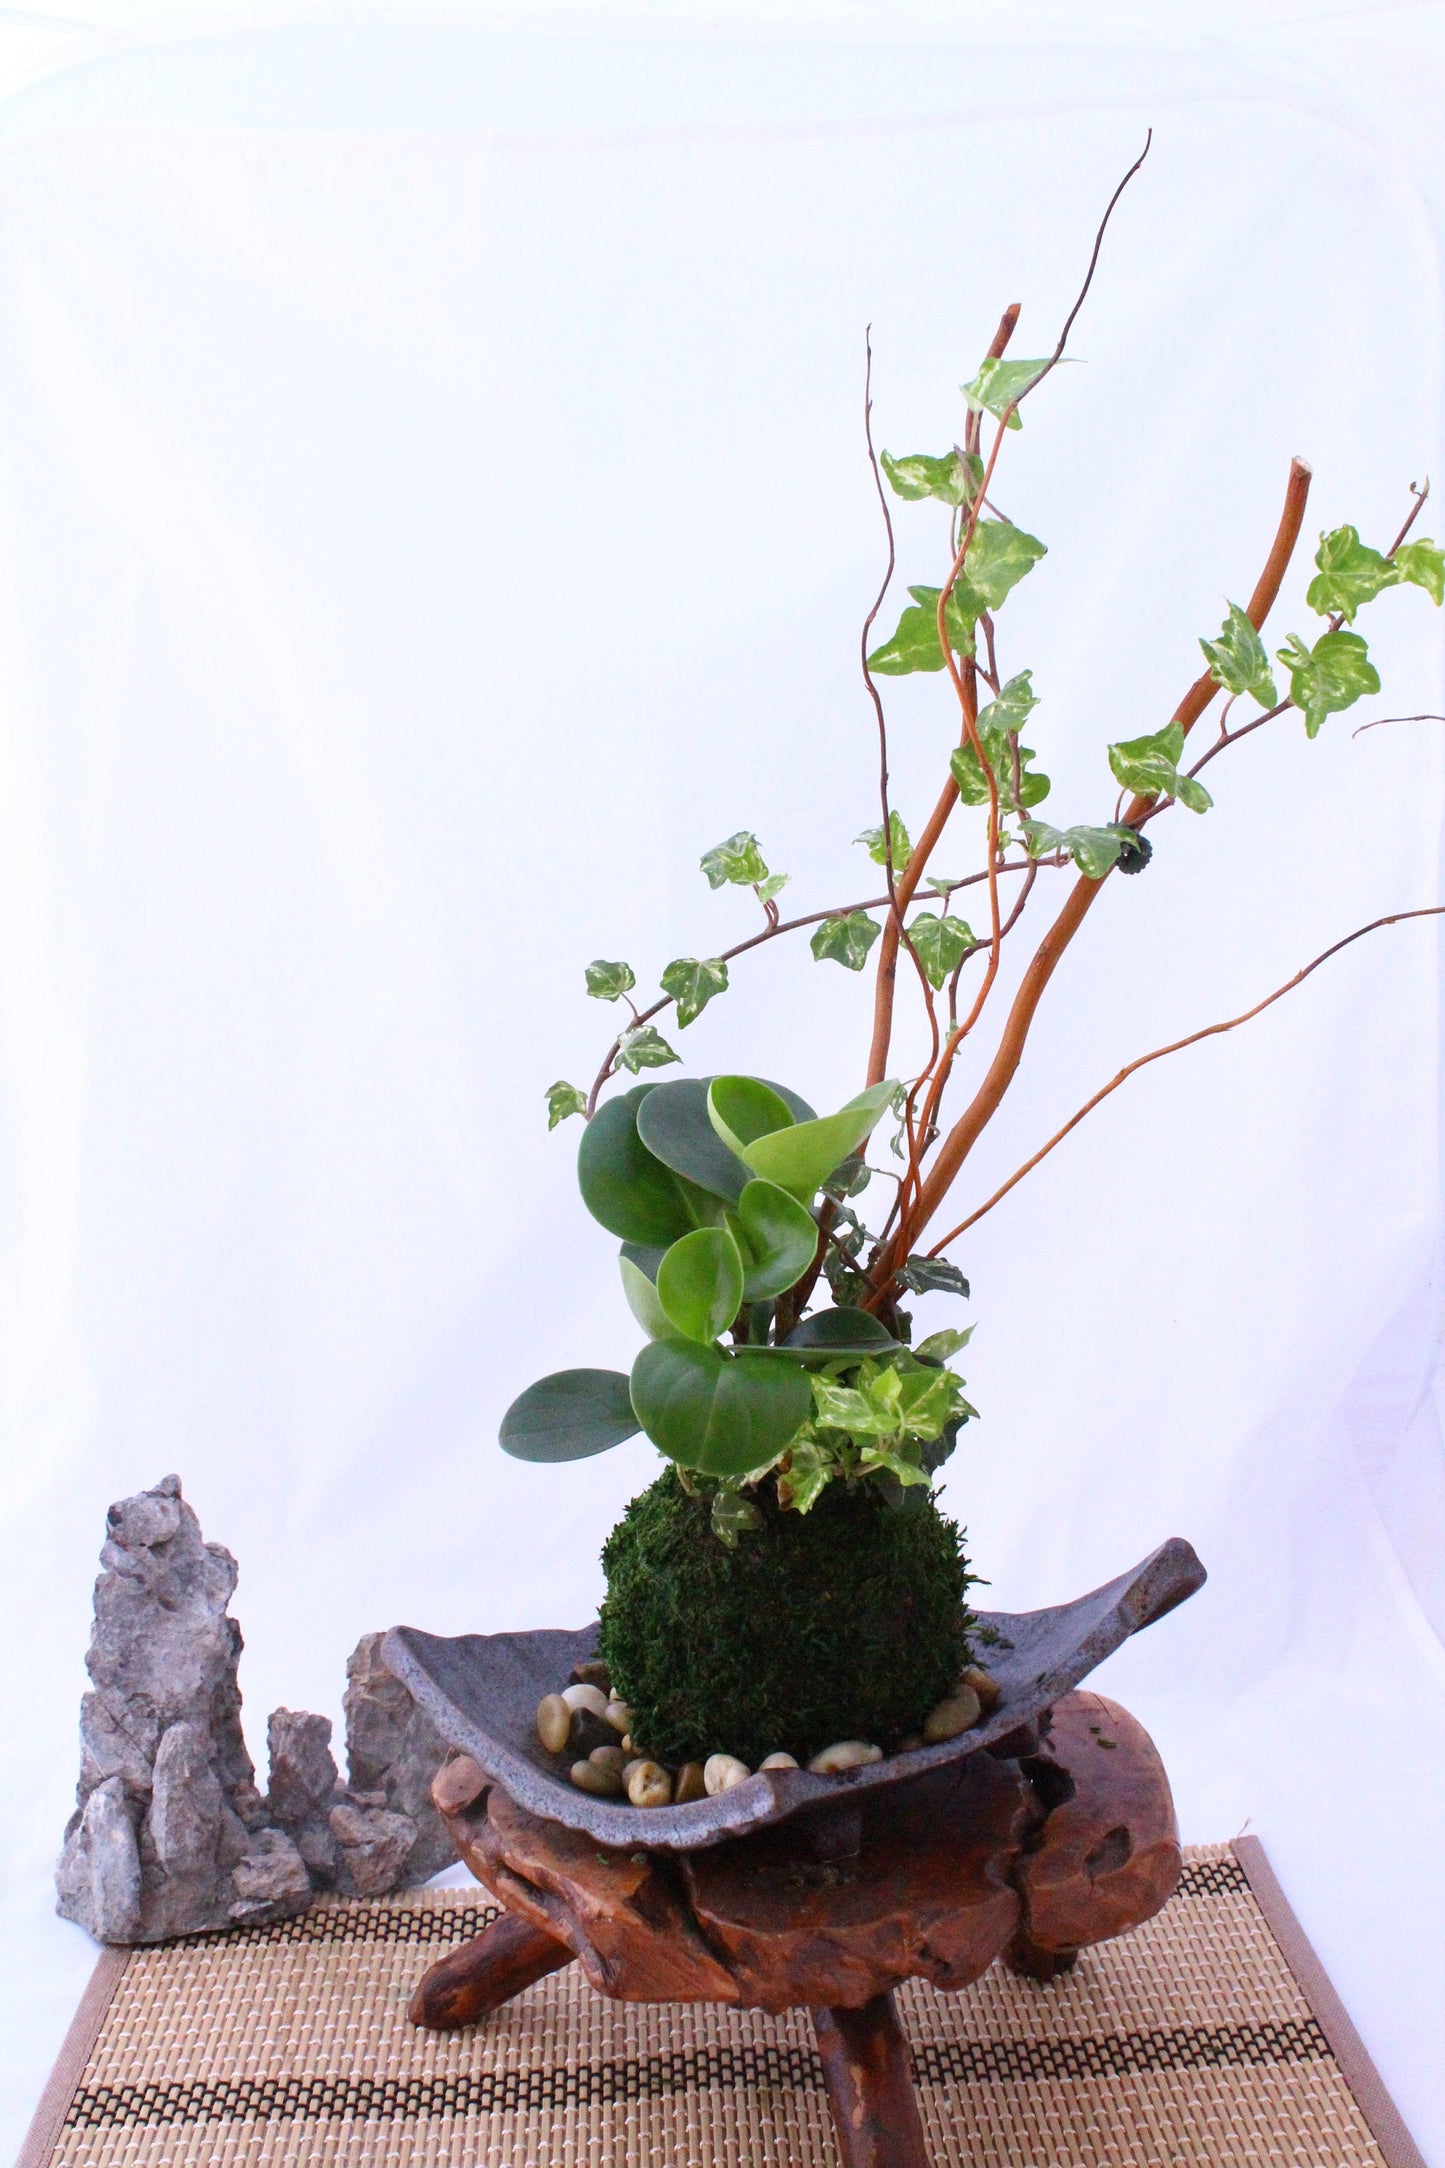 Arranged Kokedama with peperomia and ivy, Japanese traditional indoor moss ball garden